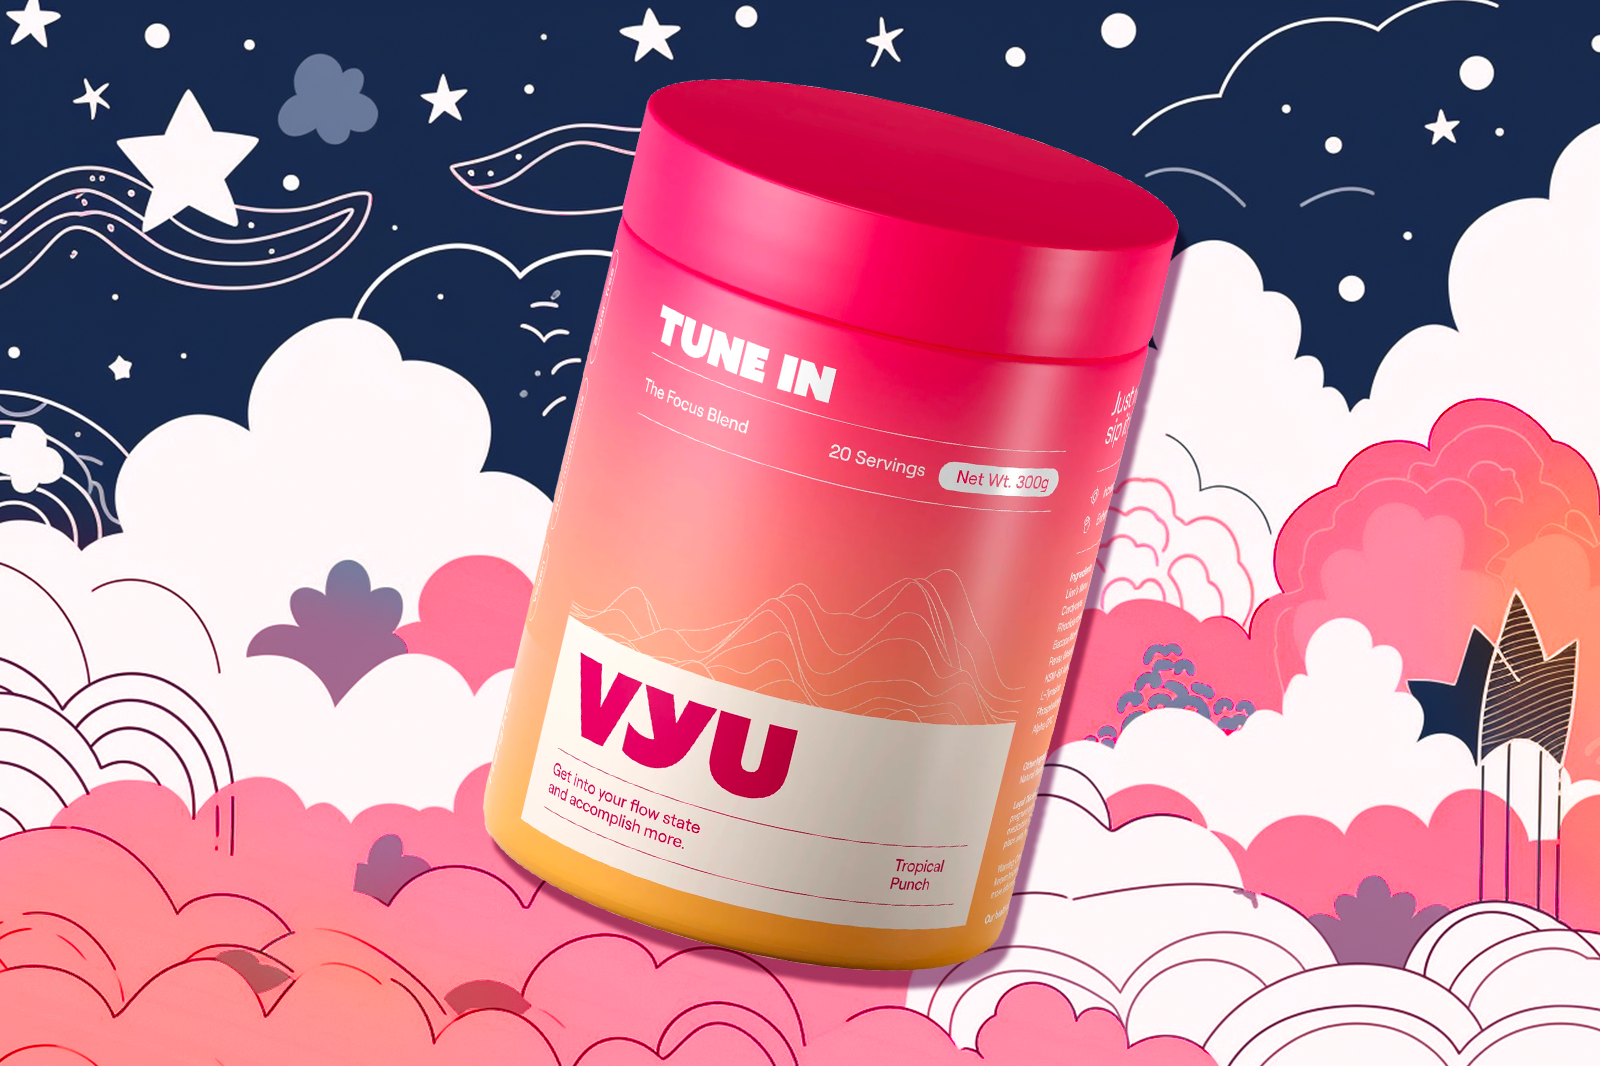 A 300gm pink colour VYU TUNE IN container with tropical punch flavor sits against a backdrop of white, pink and purple clouds, stars, and navy blue sky